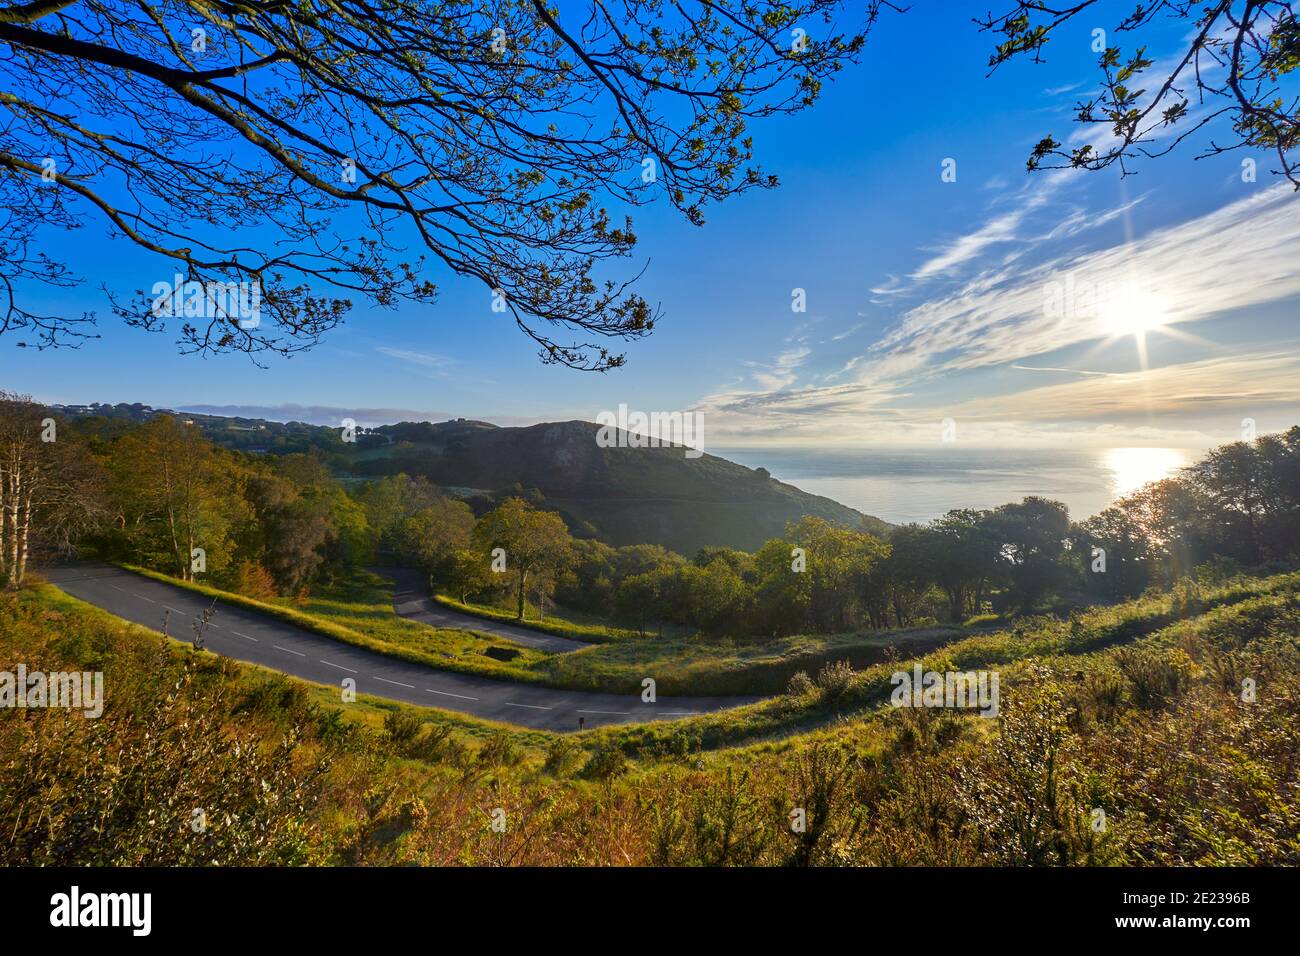 Image of Bouley Bay Hill in the sunshine with trees and grass. As well as being access to Bouley Bay, the hill is also used for a motor hill climb for Stock Photo